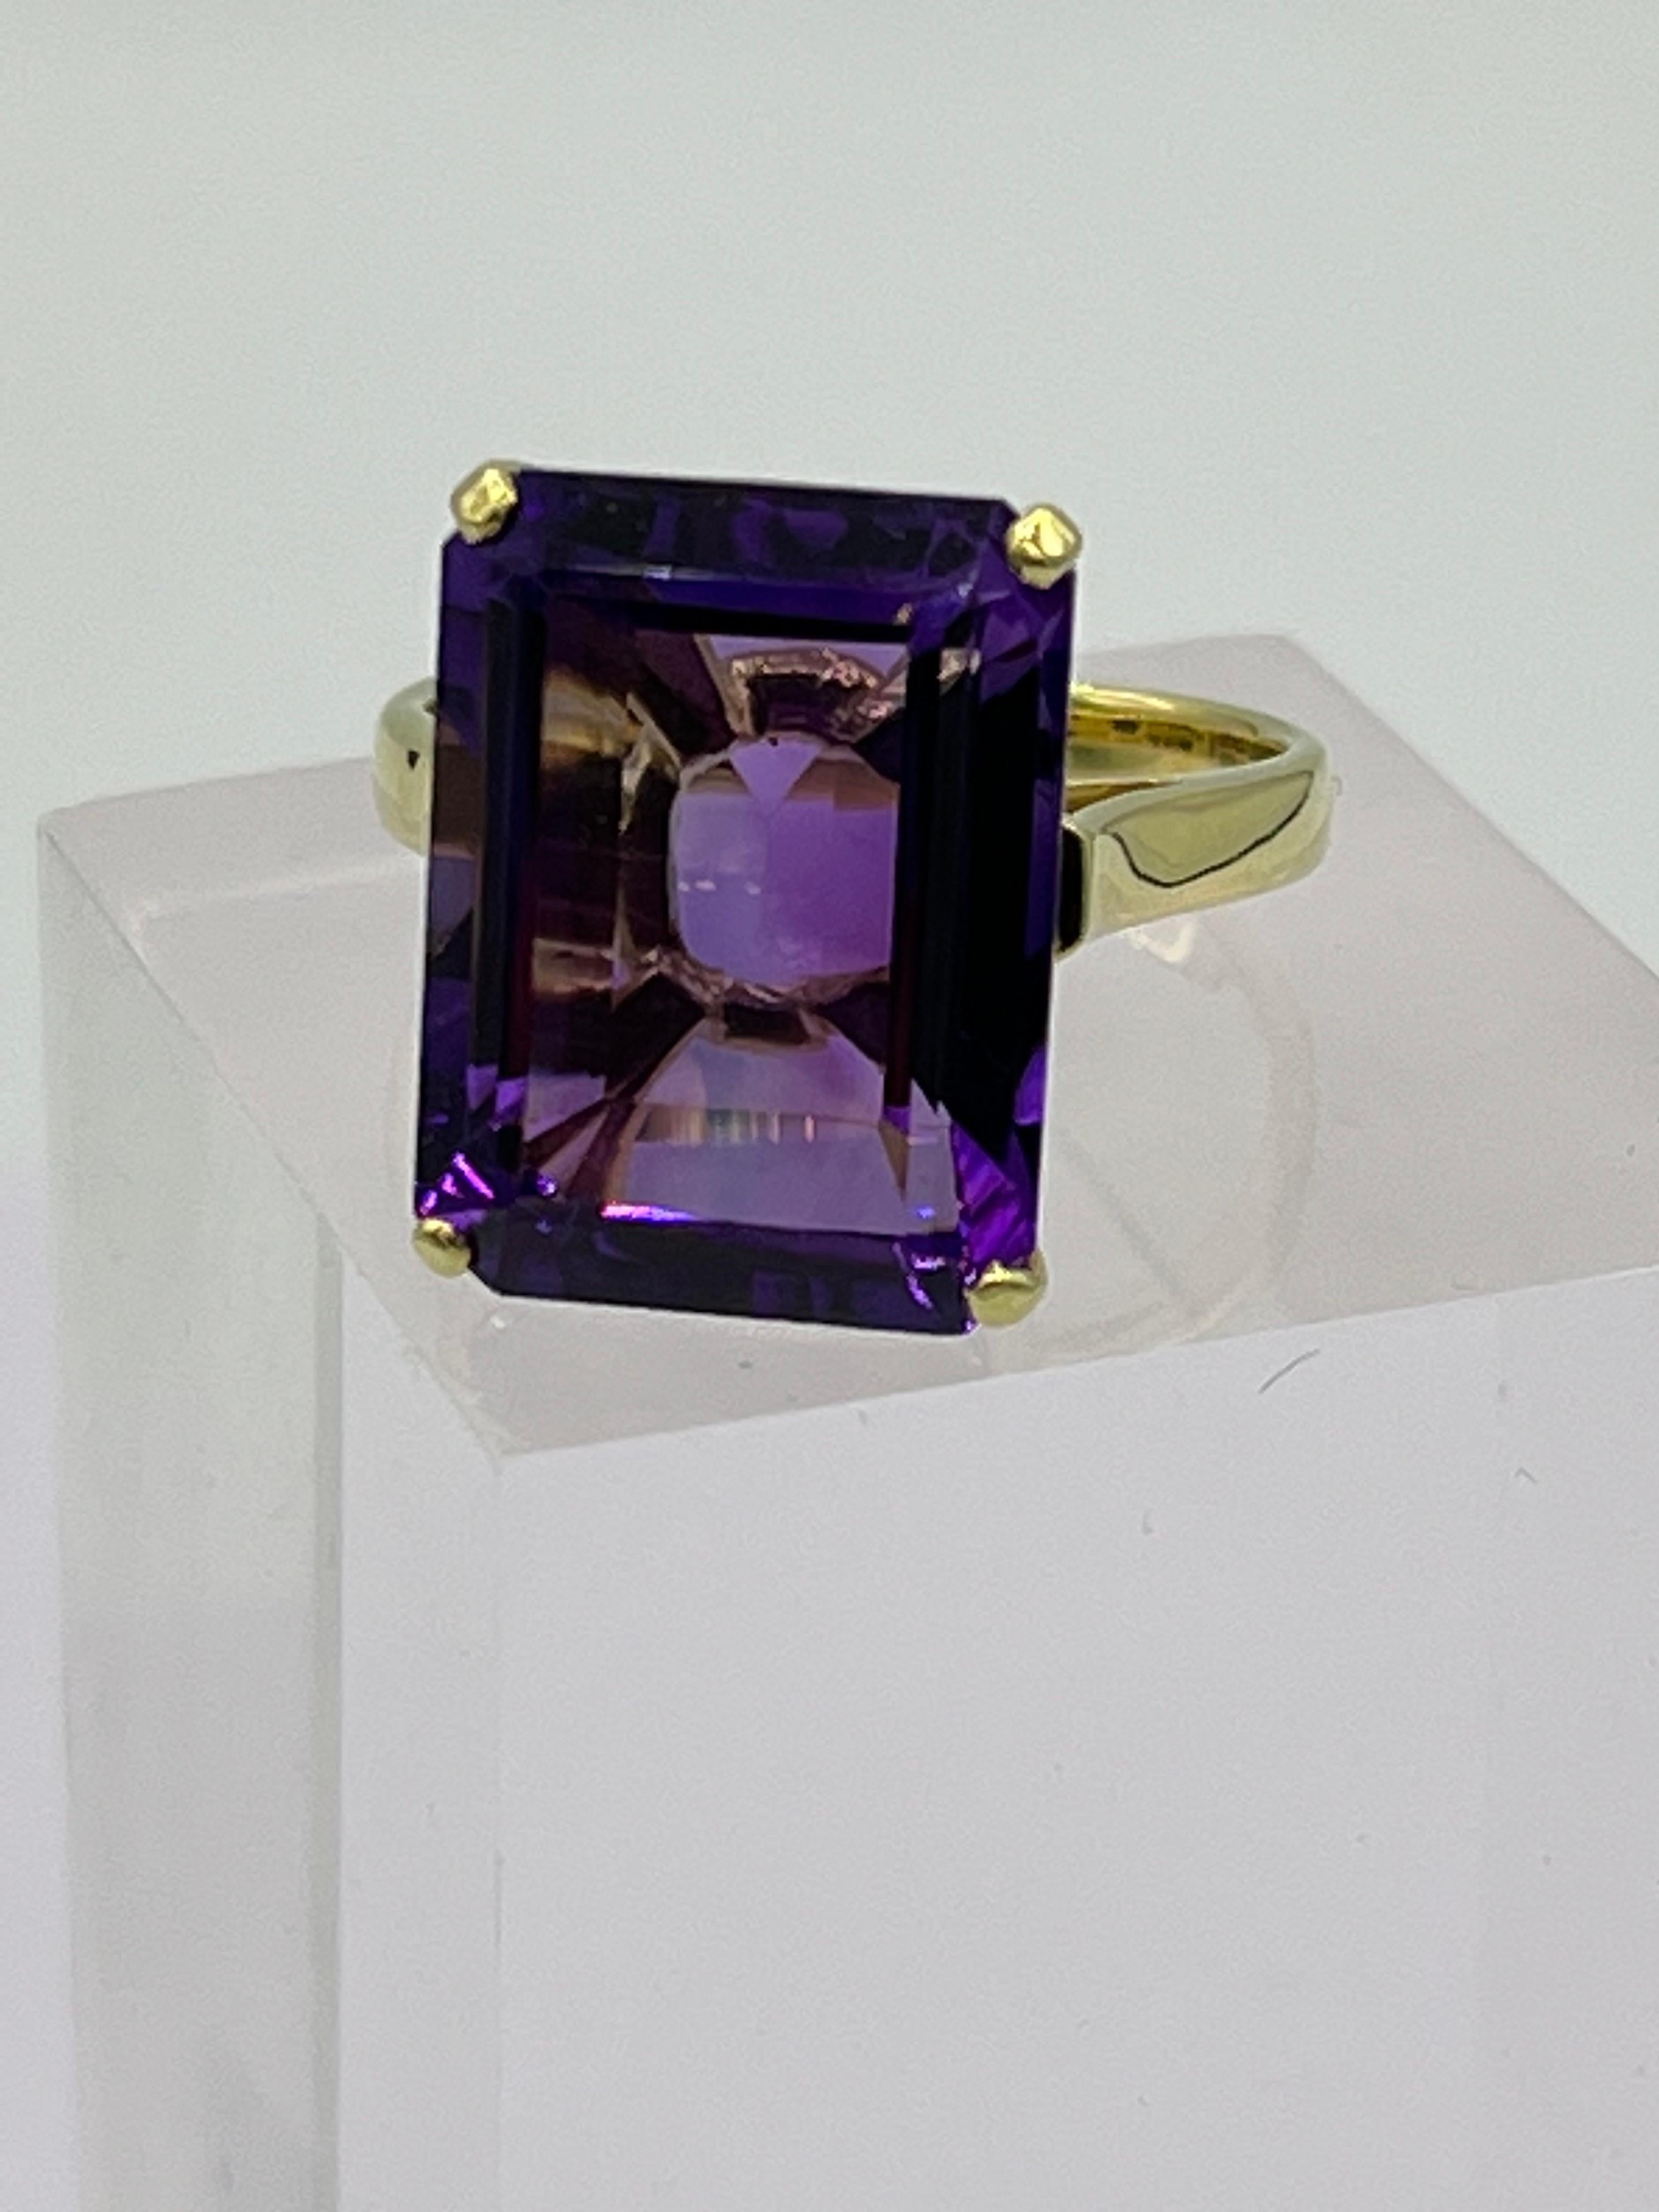 13ct Amethyst Ring in 14 K Gold For Sale 1